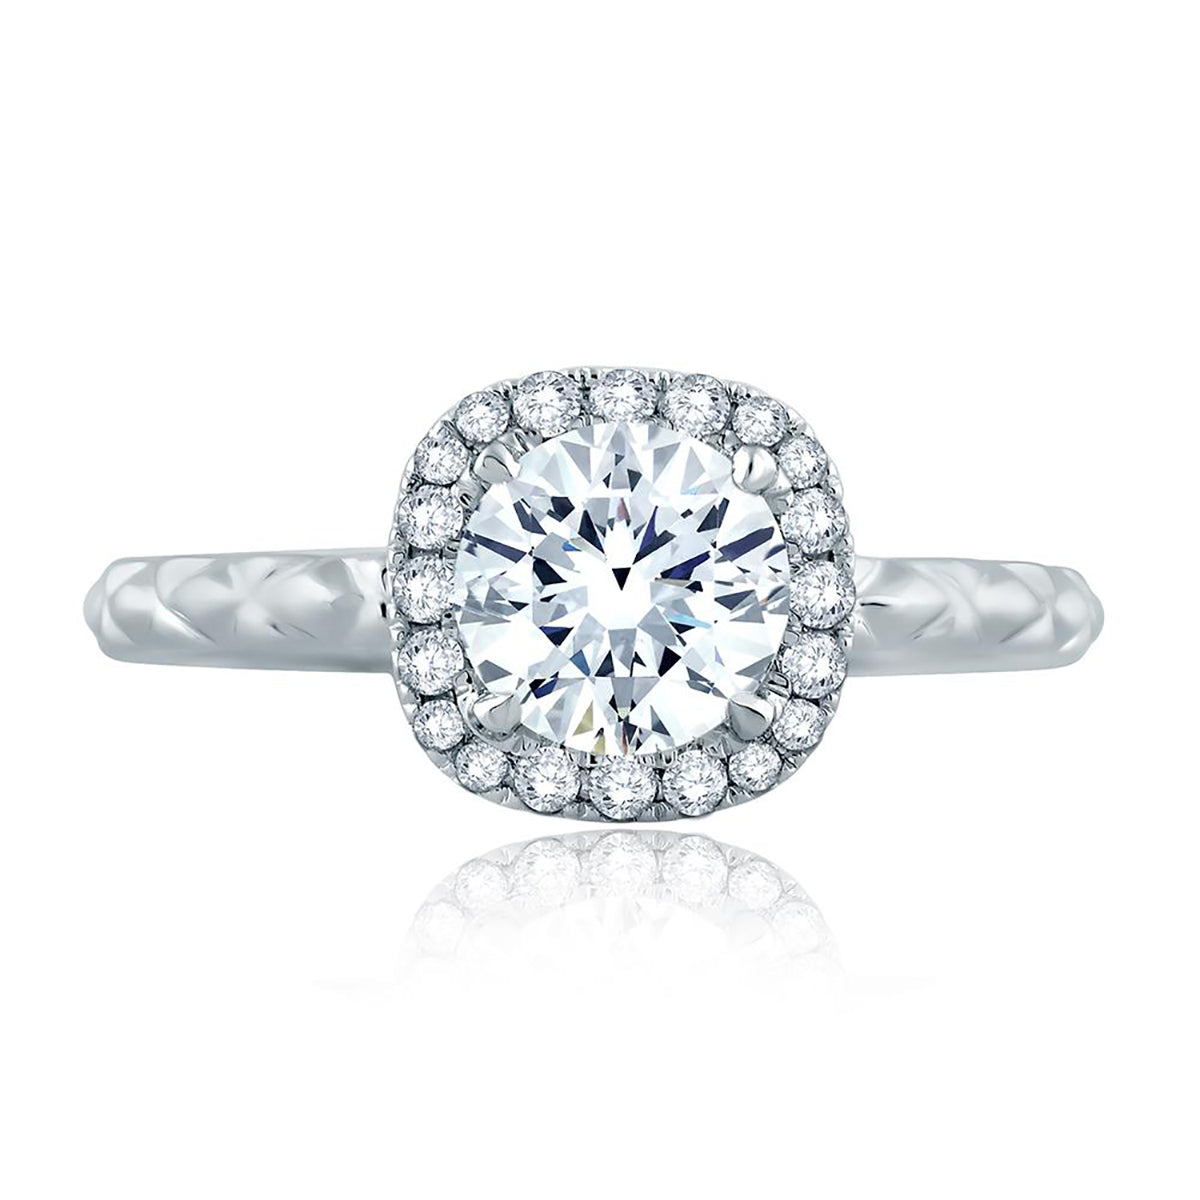 A.Jaffe Quilted Exterior and Cushion Diamond Halo with Round Center Engagement Ring ME2192Q/116